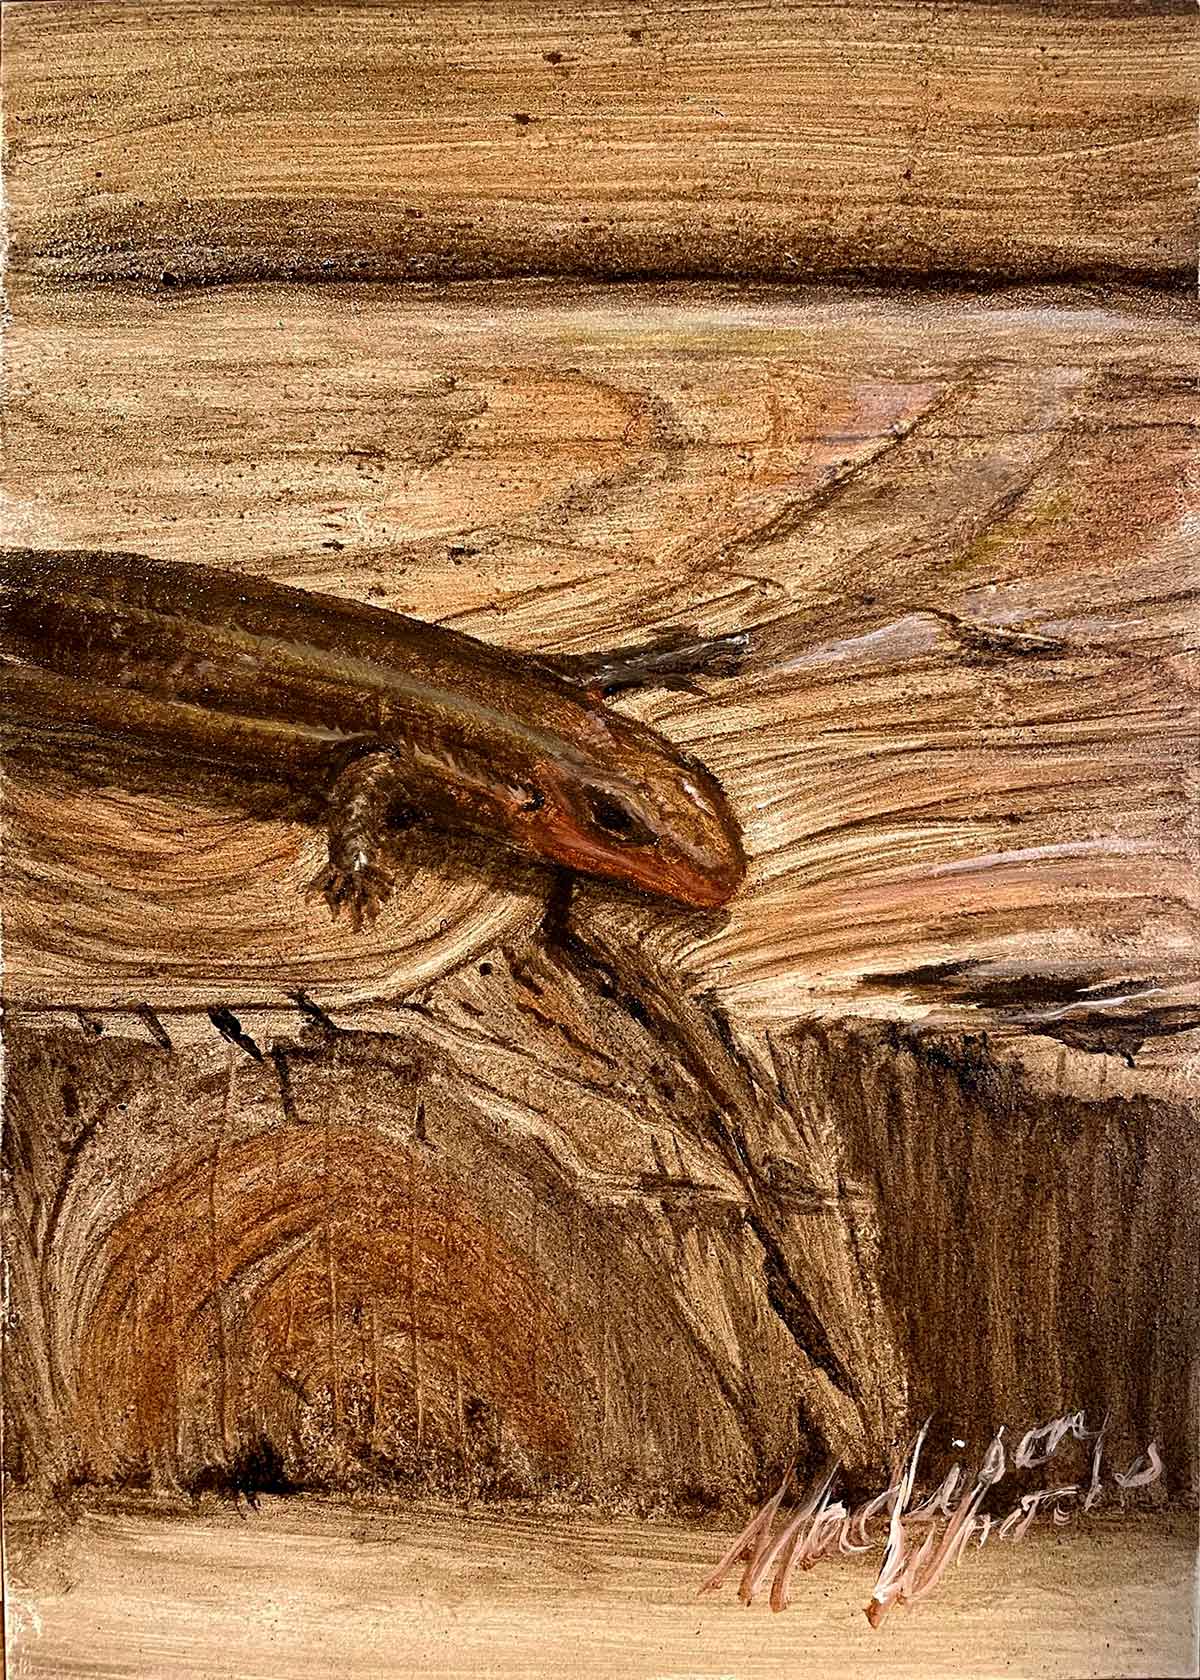 A friendly skink, painting by Madison Woods in Ozark pigments.